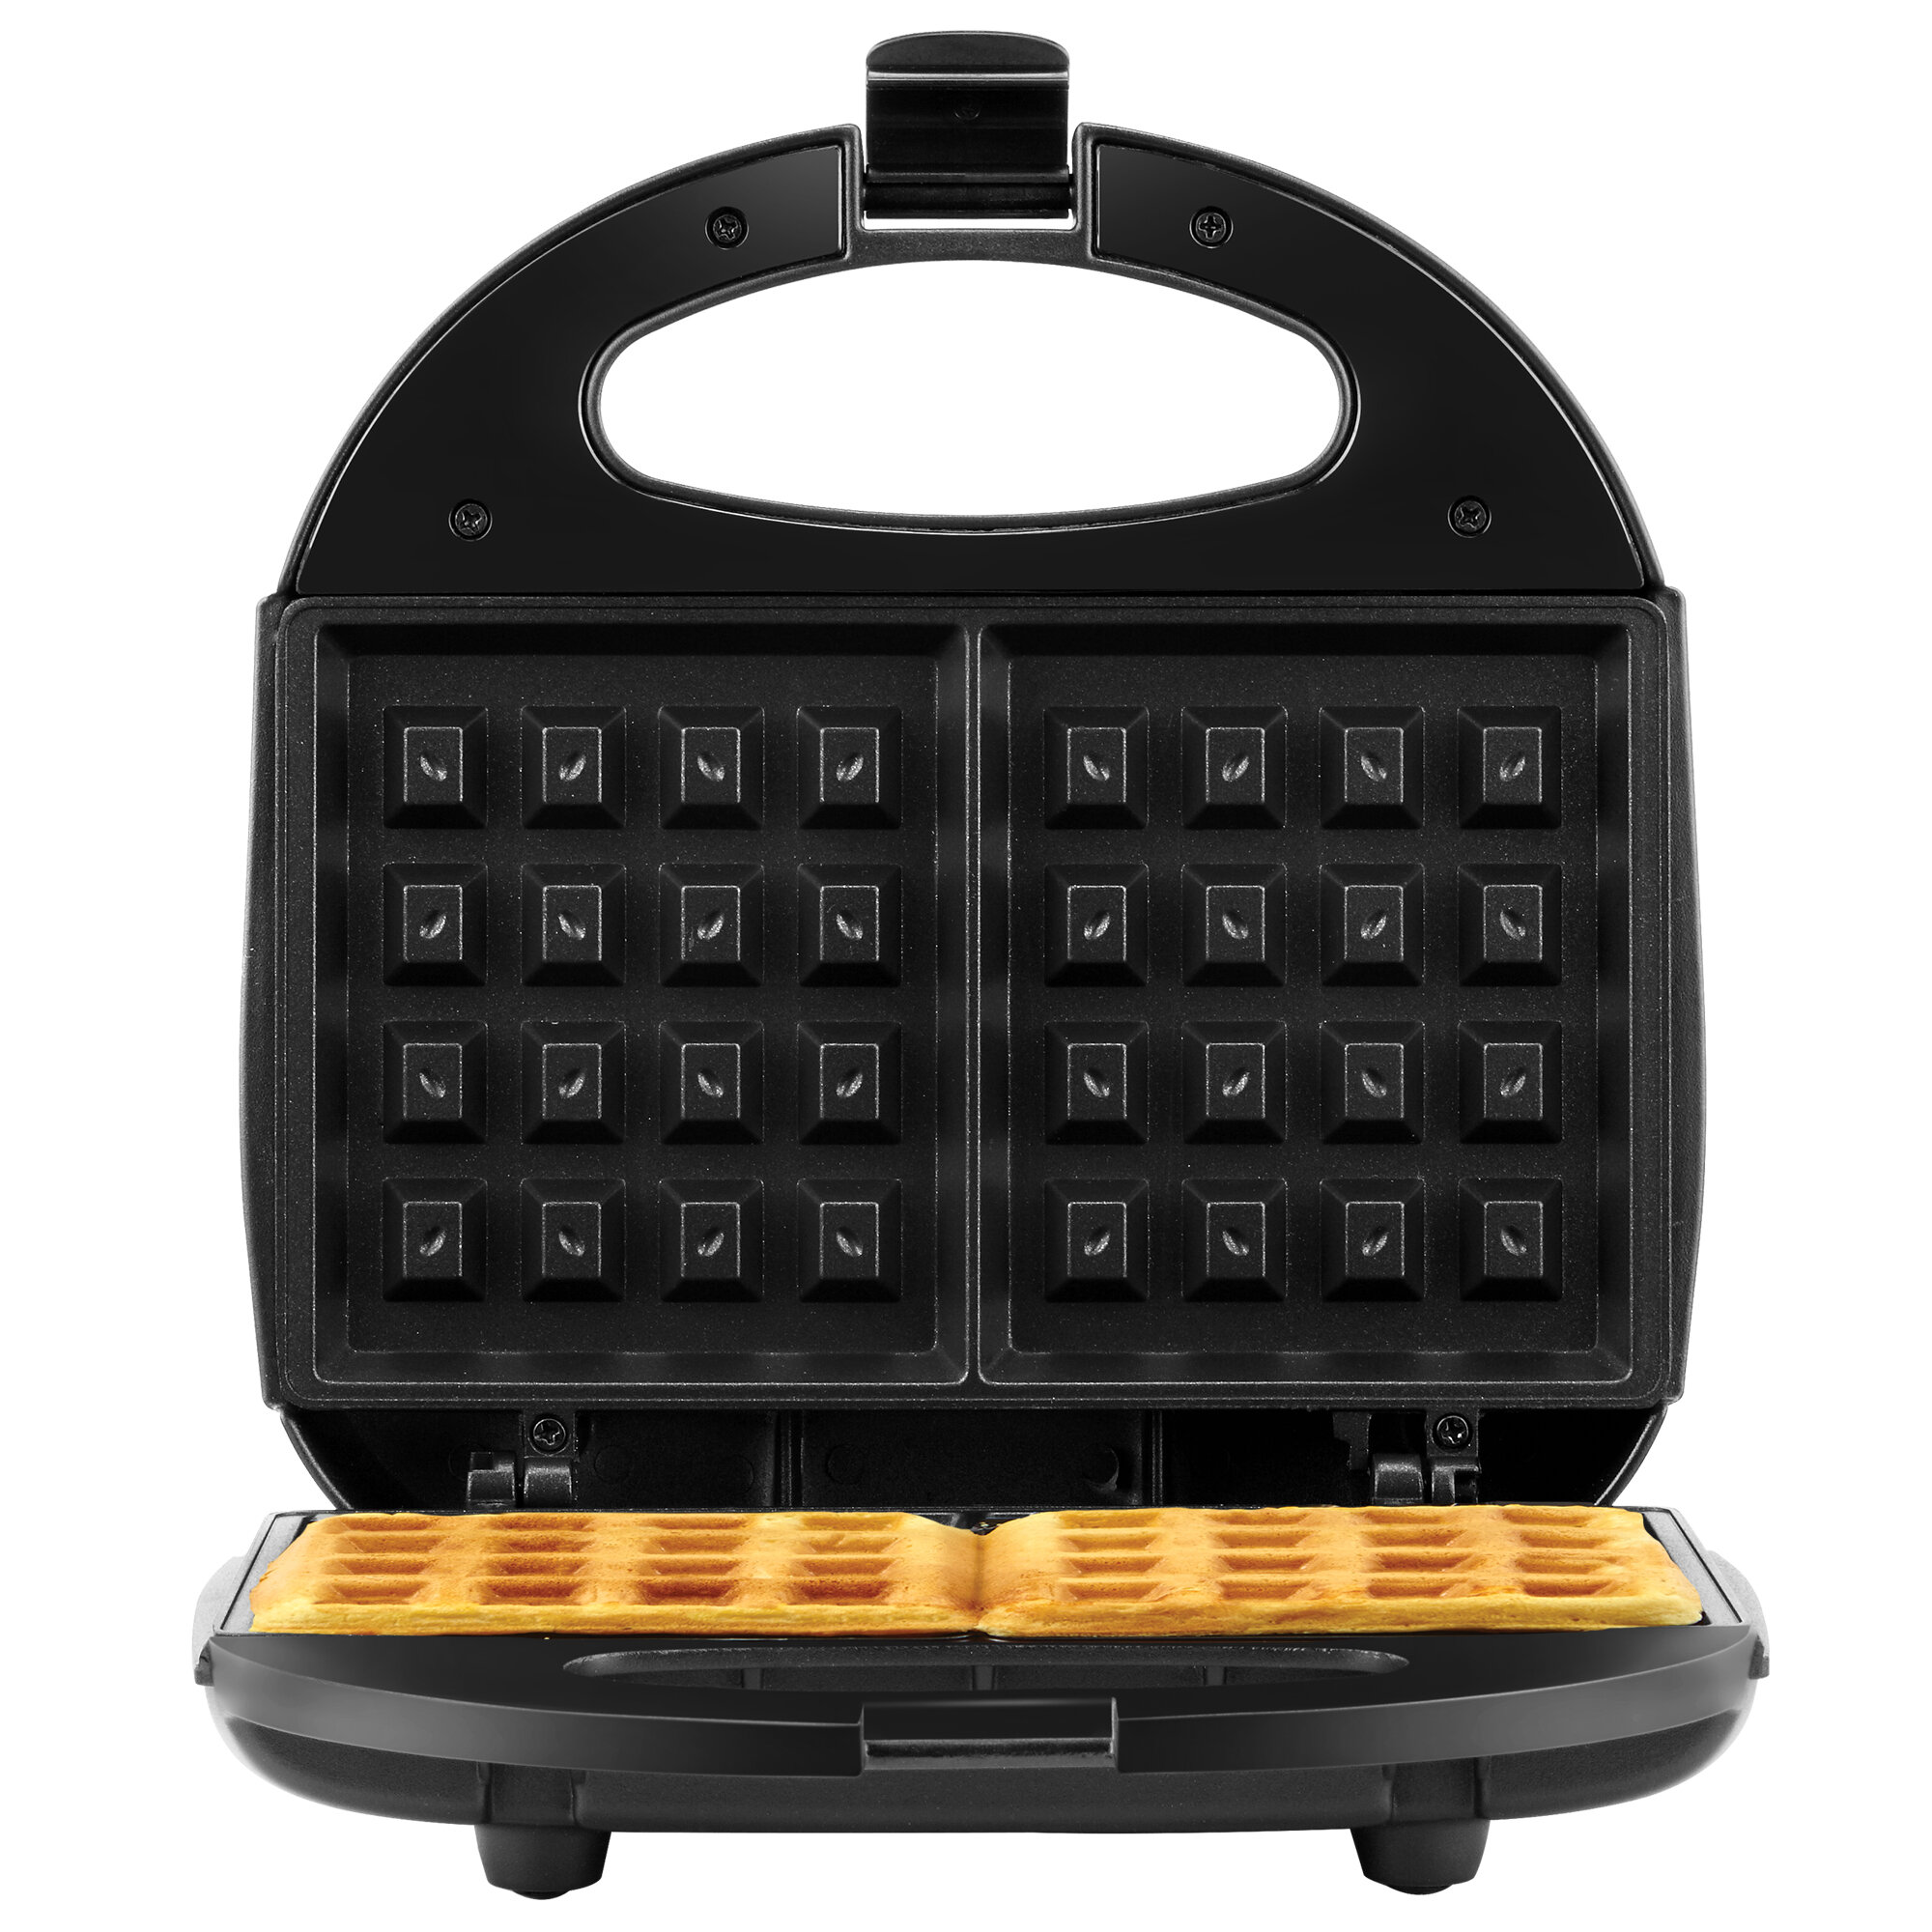 Nostalgia MyMini Personal Electric Waffle Maker 3 34 H x 6 12 W x 5 14 D  Red Heart - Office Depot